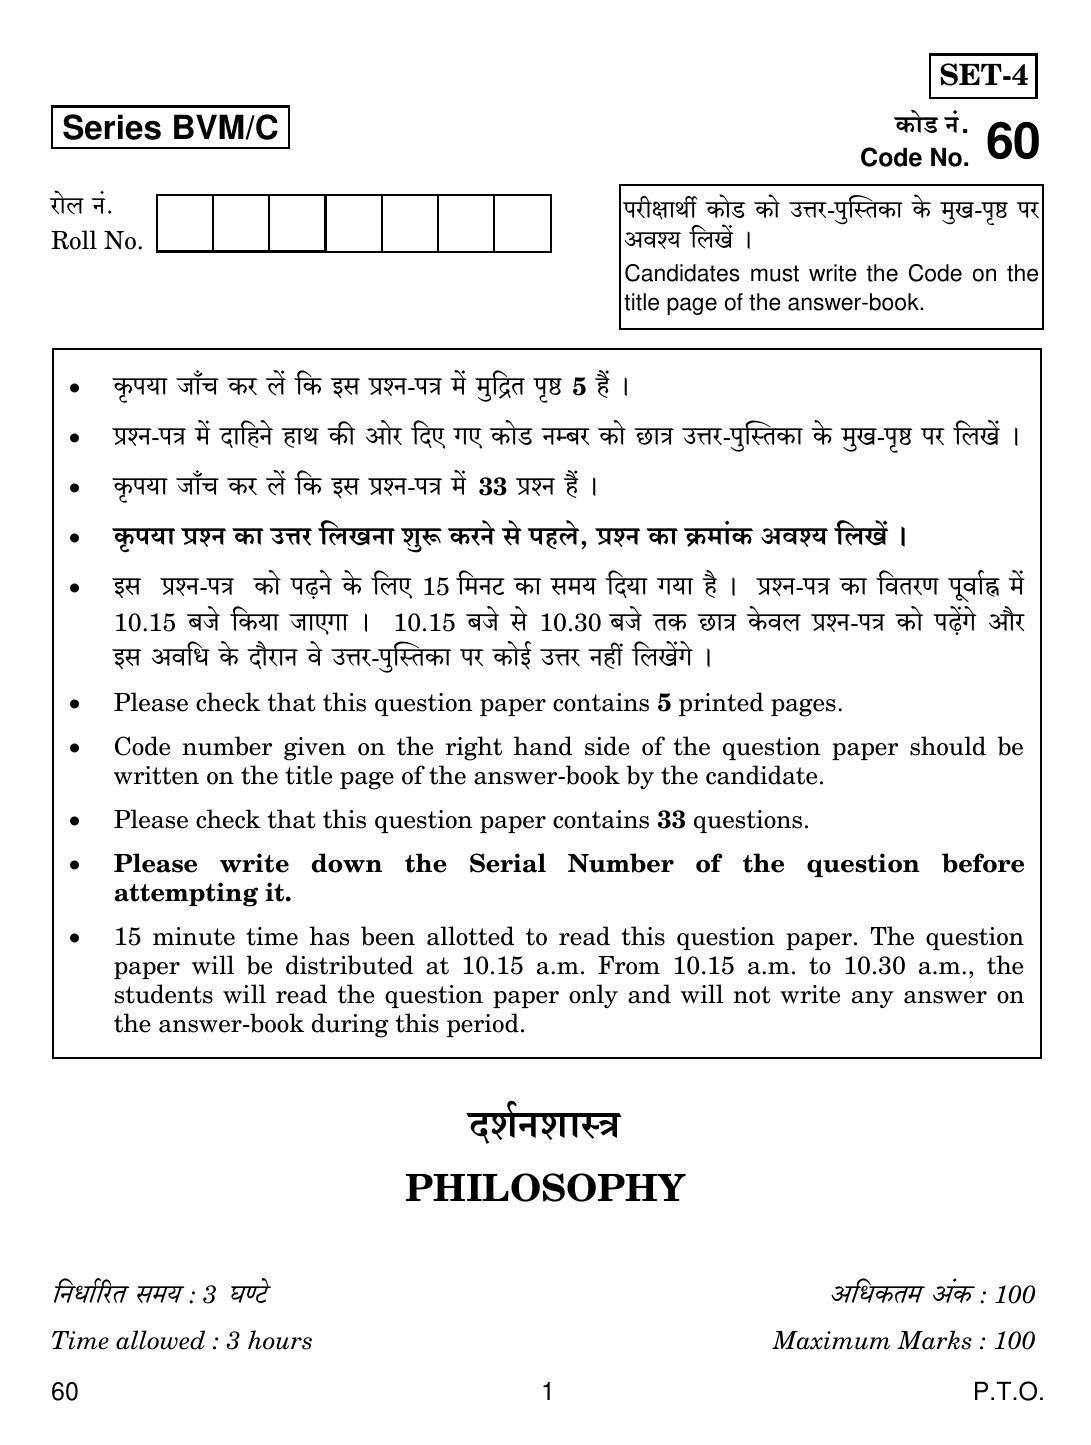 CBSE Class 12 60 PHILOSOPHY 2019 Compartment Question Paper - Page 1